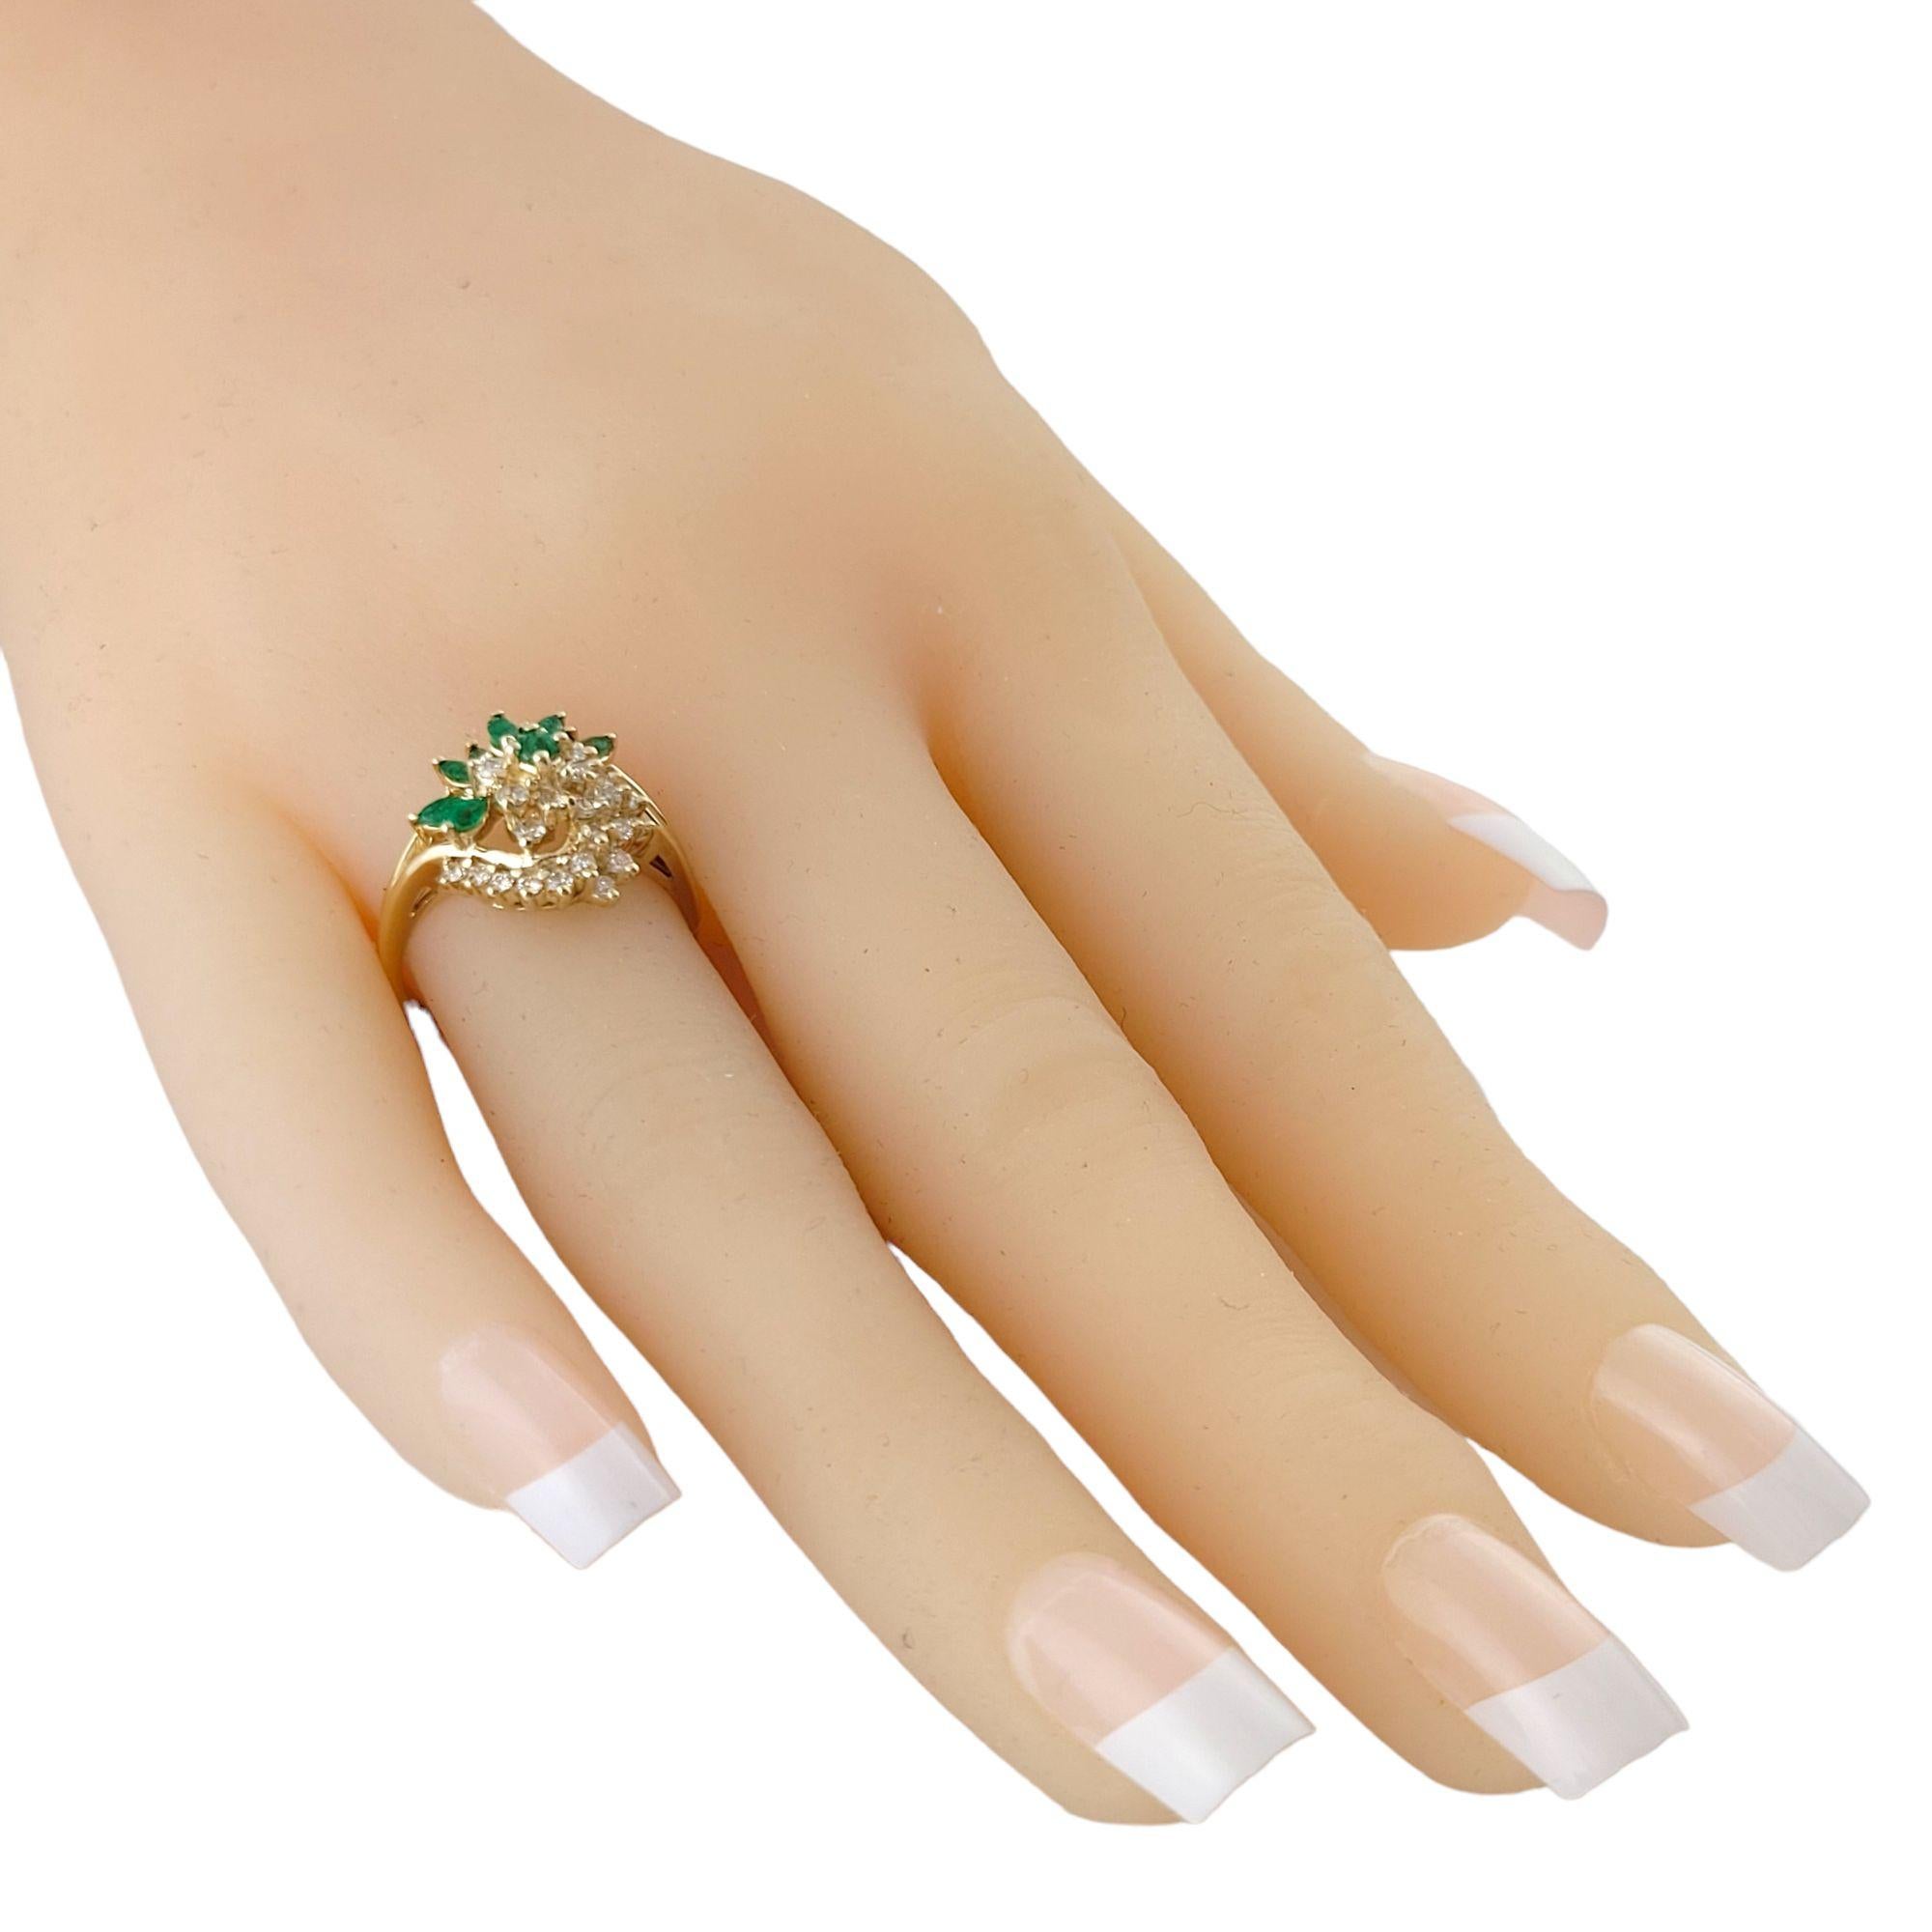 Vintage 14k Yellow Gold Emerald and Diamond Ring Size 7.25

21 gorgeous round brilliant cut diamonds and 10 emerald stones set in a 14K yellow gold ring!

Approximate total diamond weight: 0.30 cts

Diamond clarity: I1

Diamond color: H

Ring size: